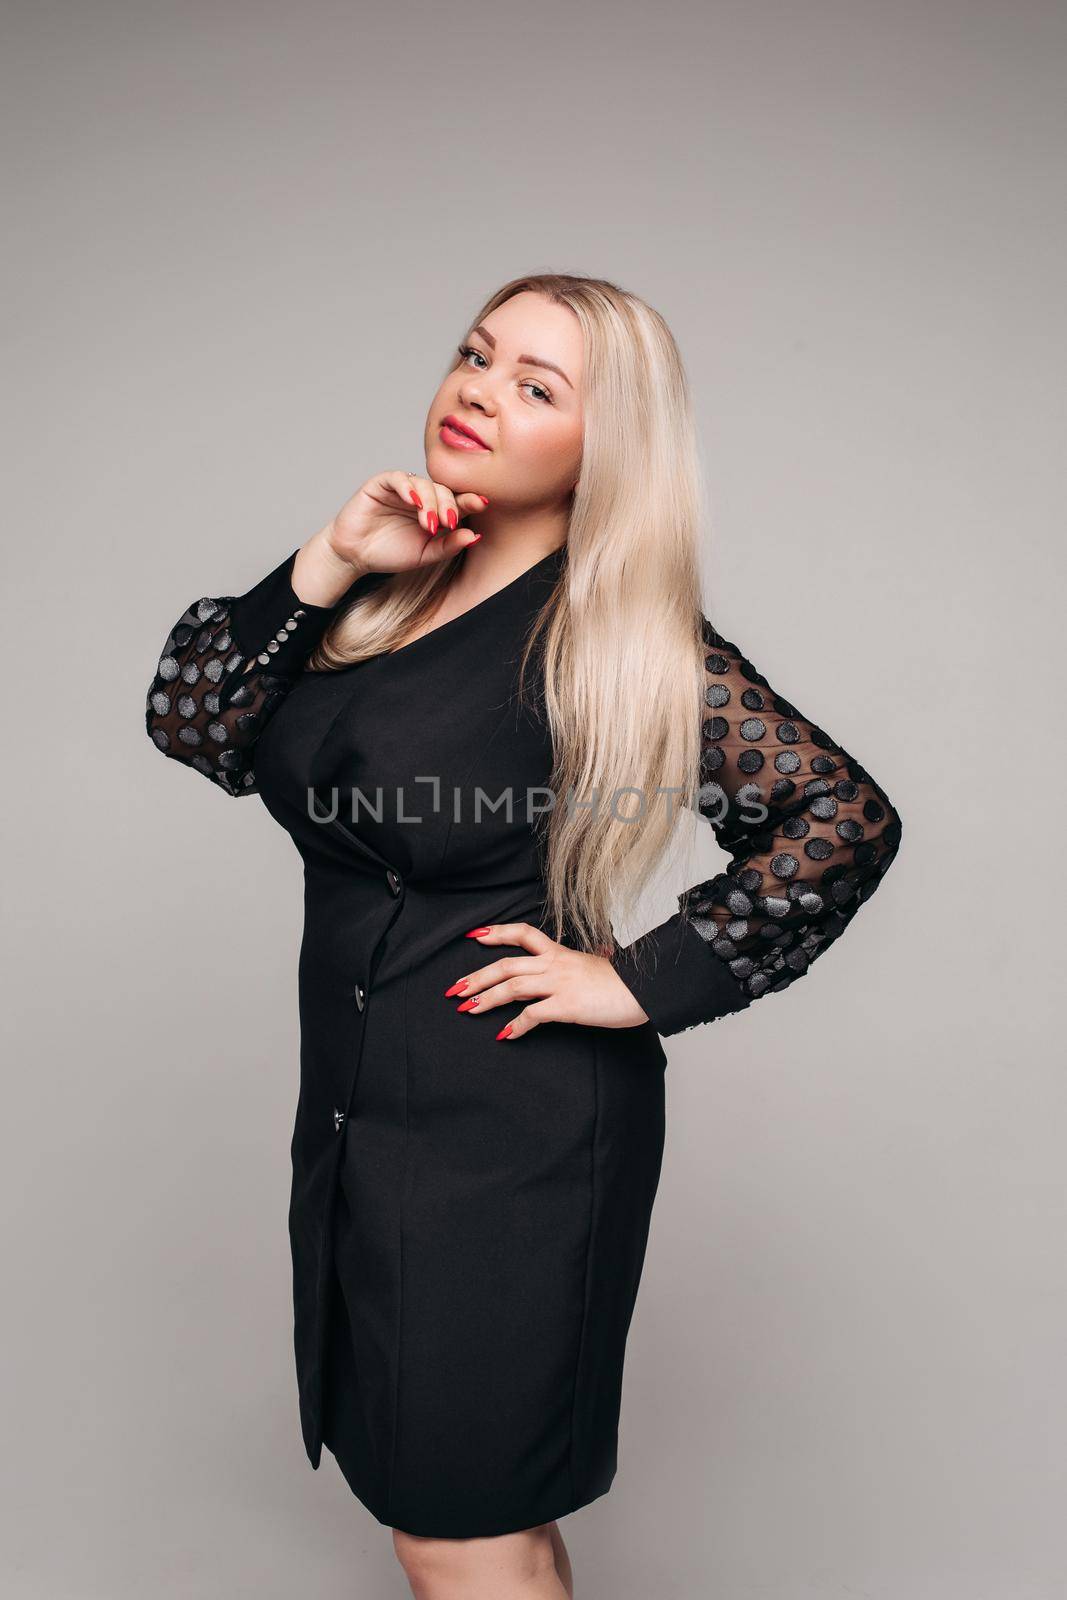 attractive woman with long blonde hair in black dress smiling on white background by StudioLucky